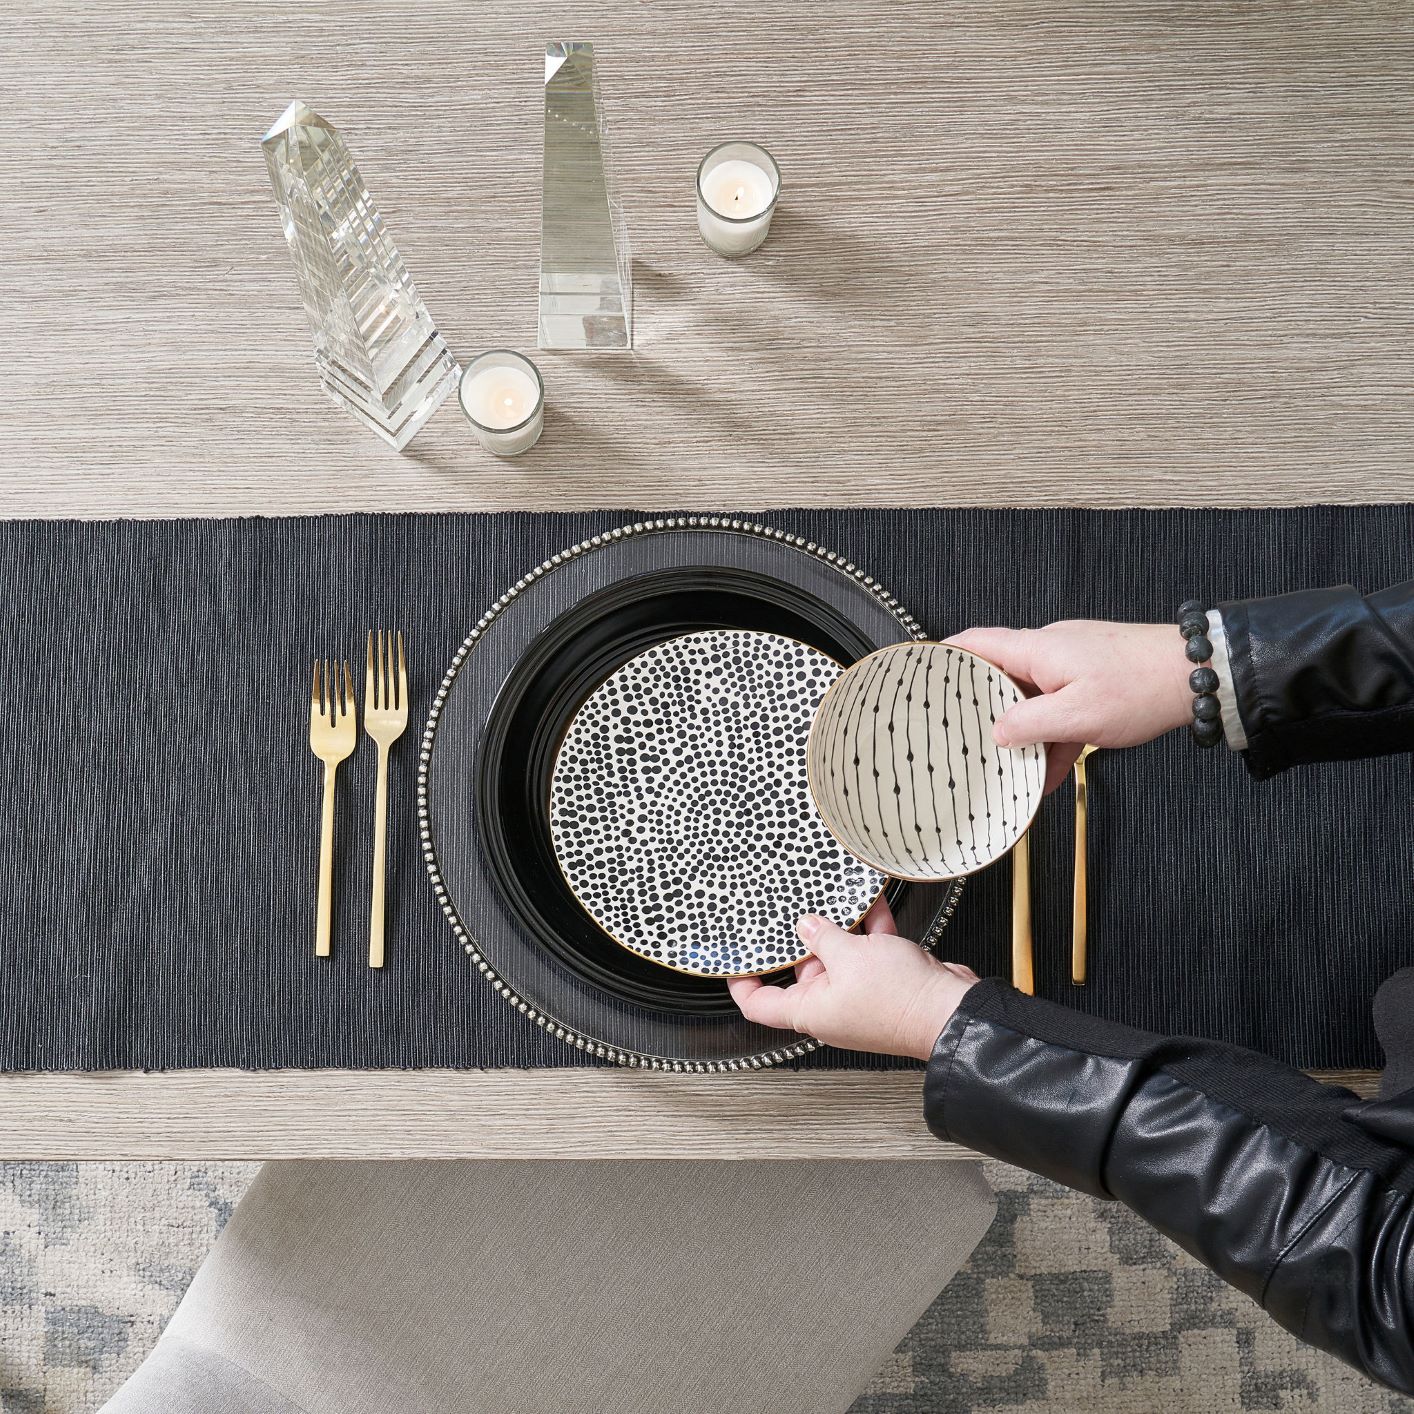 table with black tablecloth, plate, gold flatware, and patterned bowls